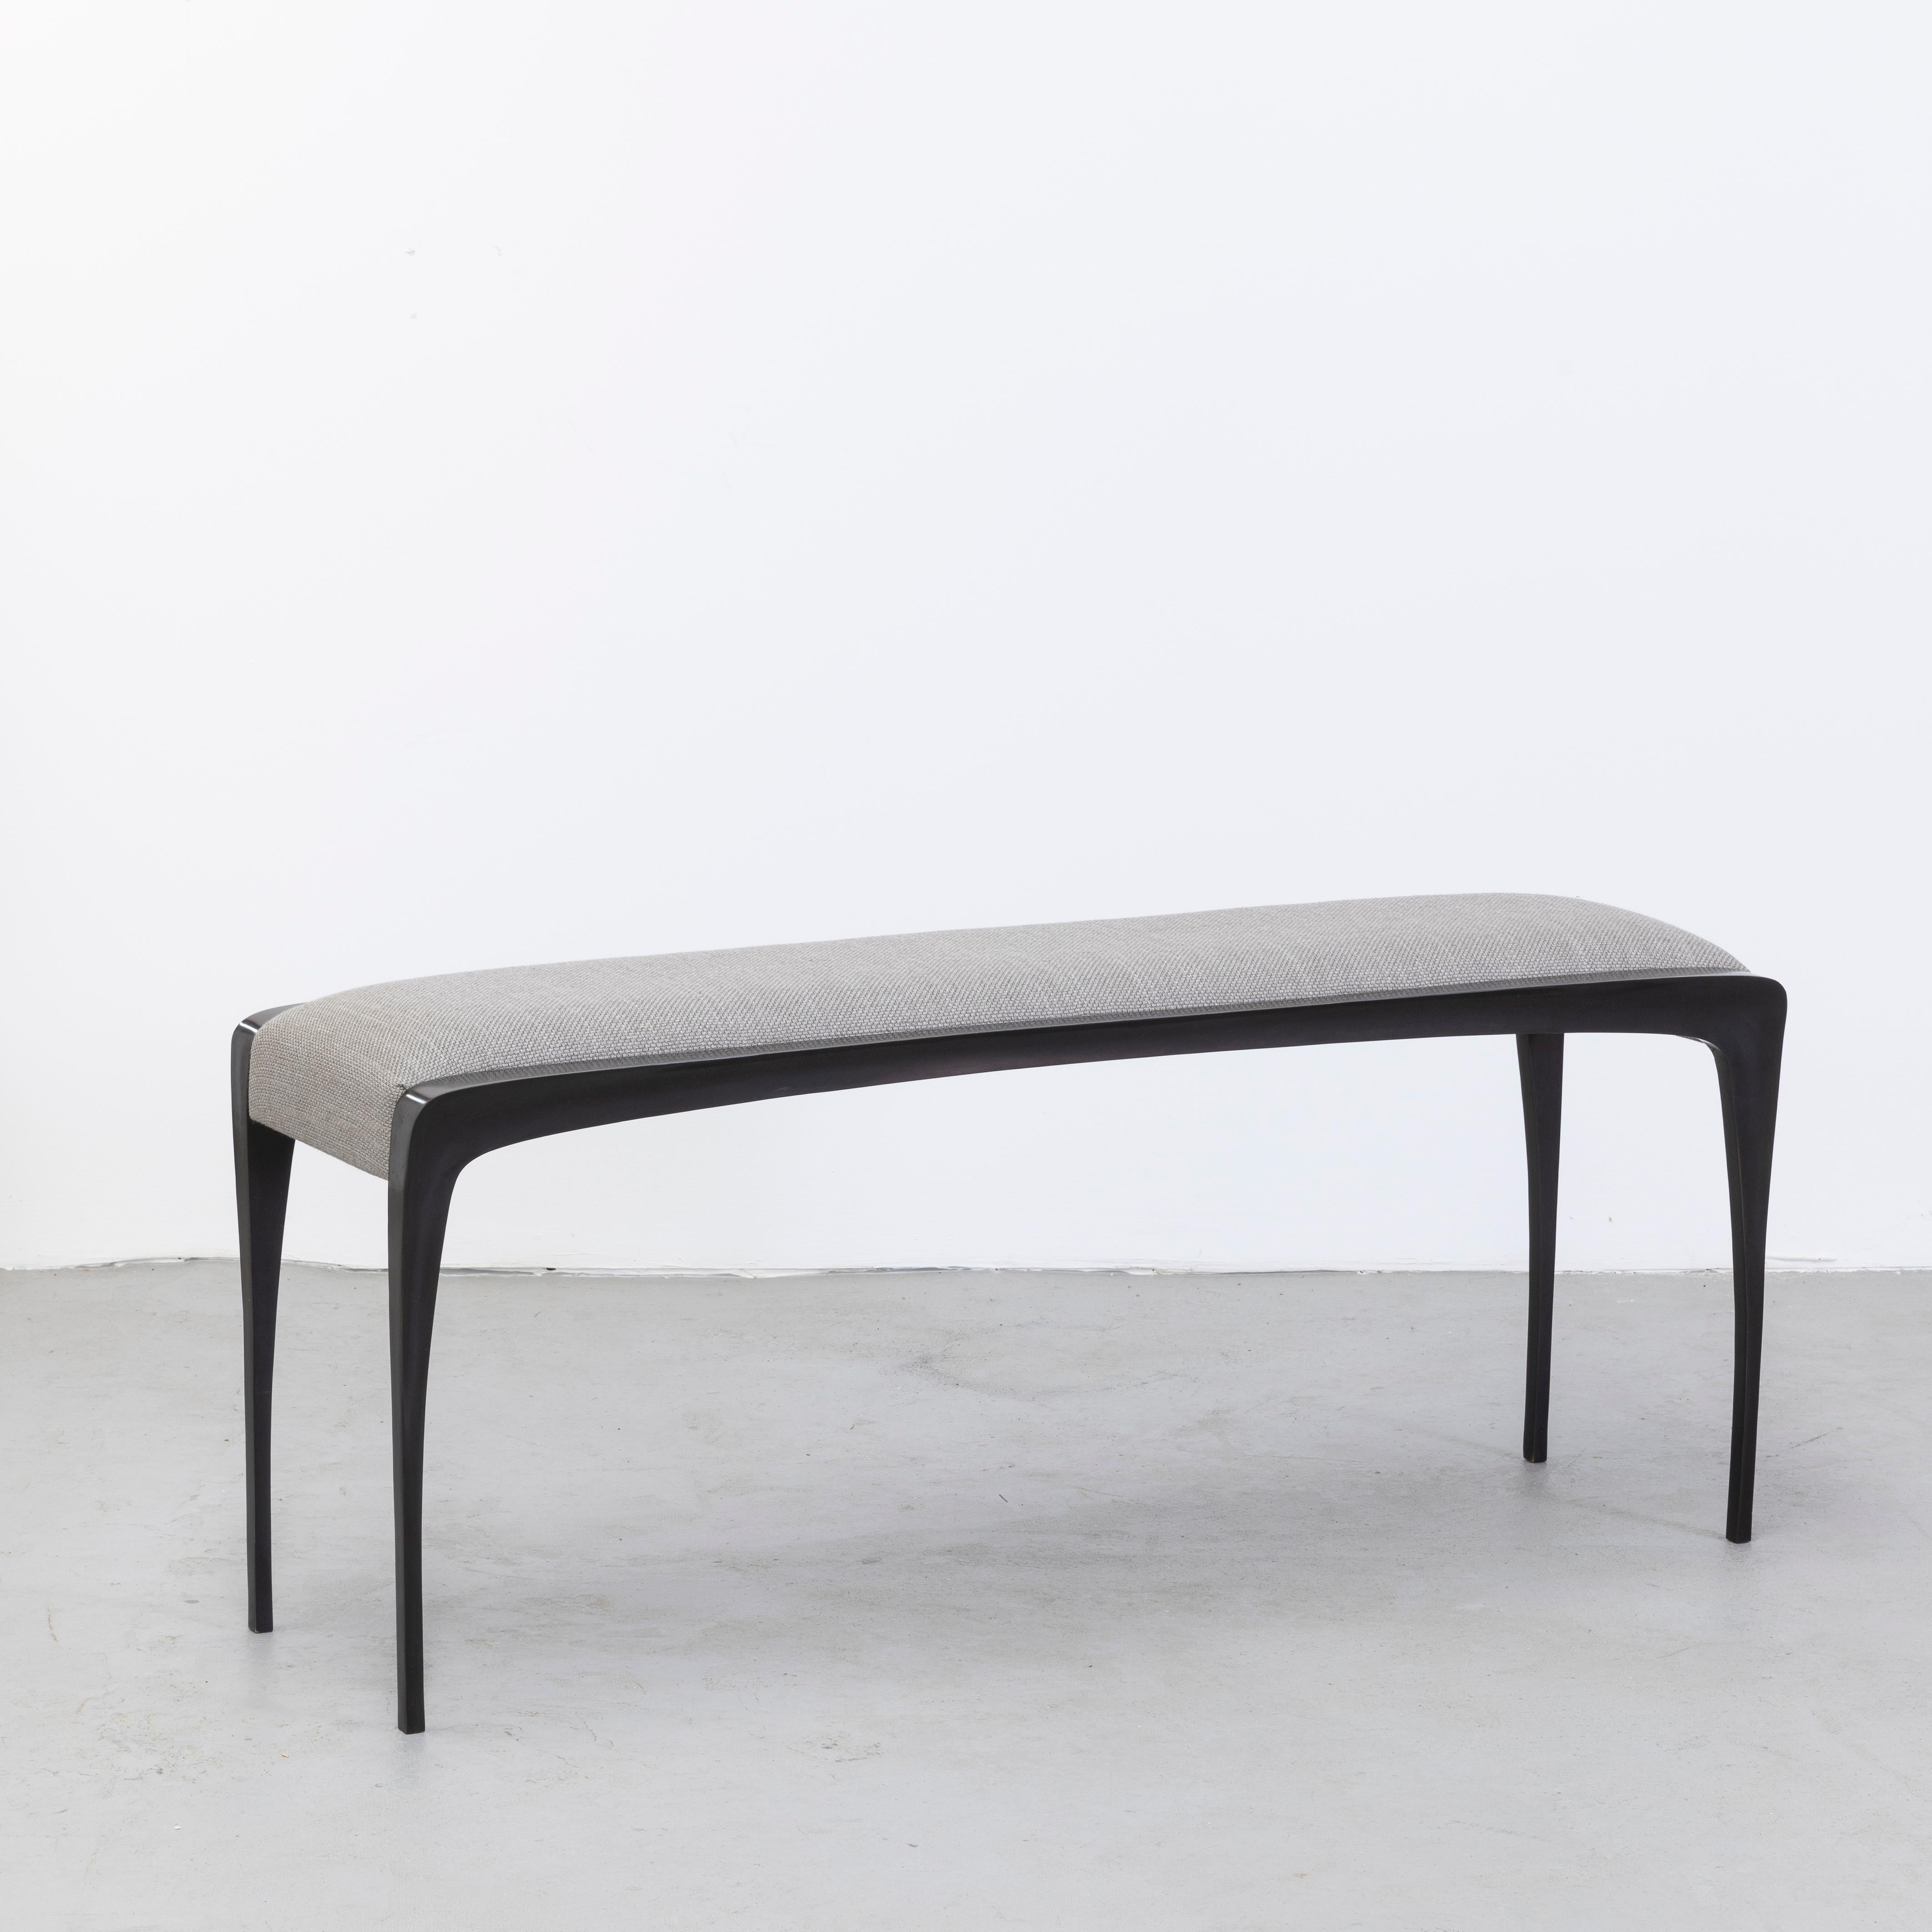 Elegant bronze bench with soft edges. Dark patina.
Elegant 2-tone bronze coffee table. 
Influenced by her studies in fashion design Anasthasia Millot creates subtly dynamic shapes that seem to defy the static of solid material. 

 Anasthasia